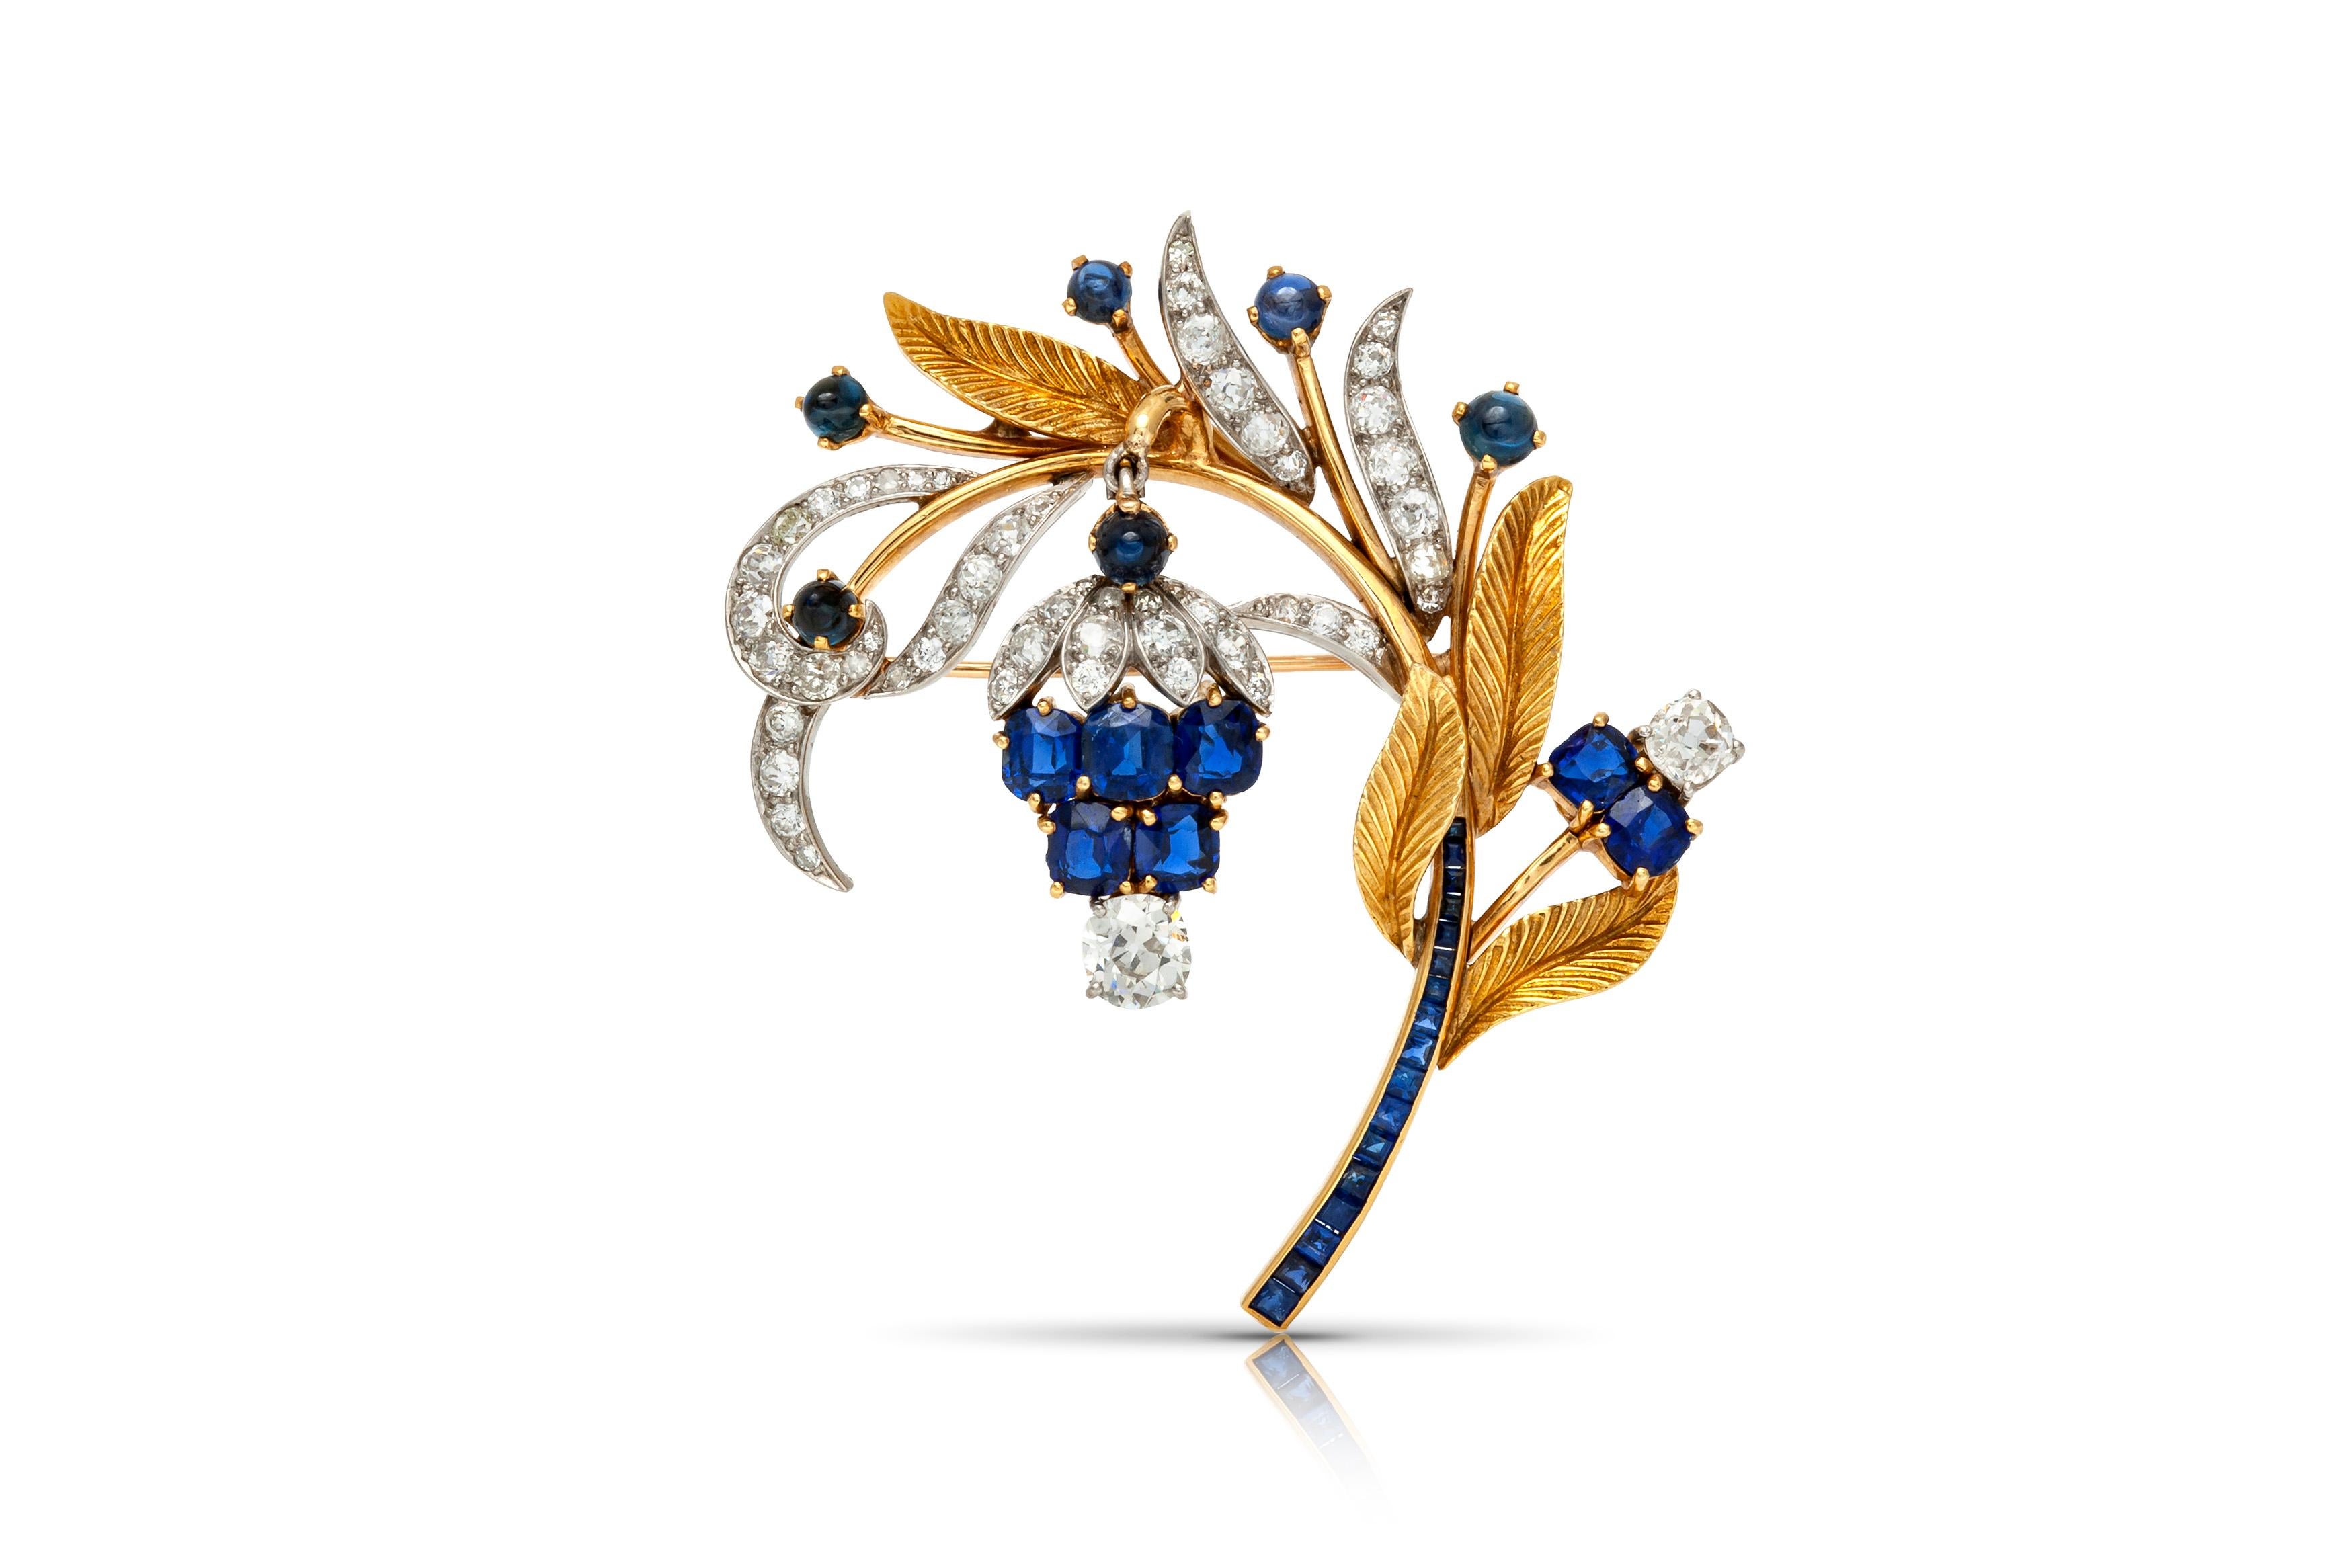 Brooch, finely crafted in 18k yellow gold and platinum with sapphires weighting approximately a total of 10.00 carats and diamonds weighting approximately a total of 4.00 carats. Circa 1940's.